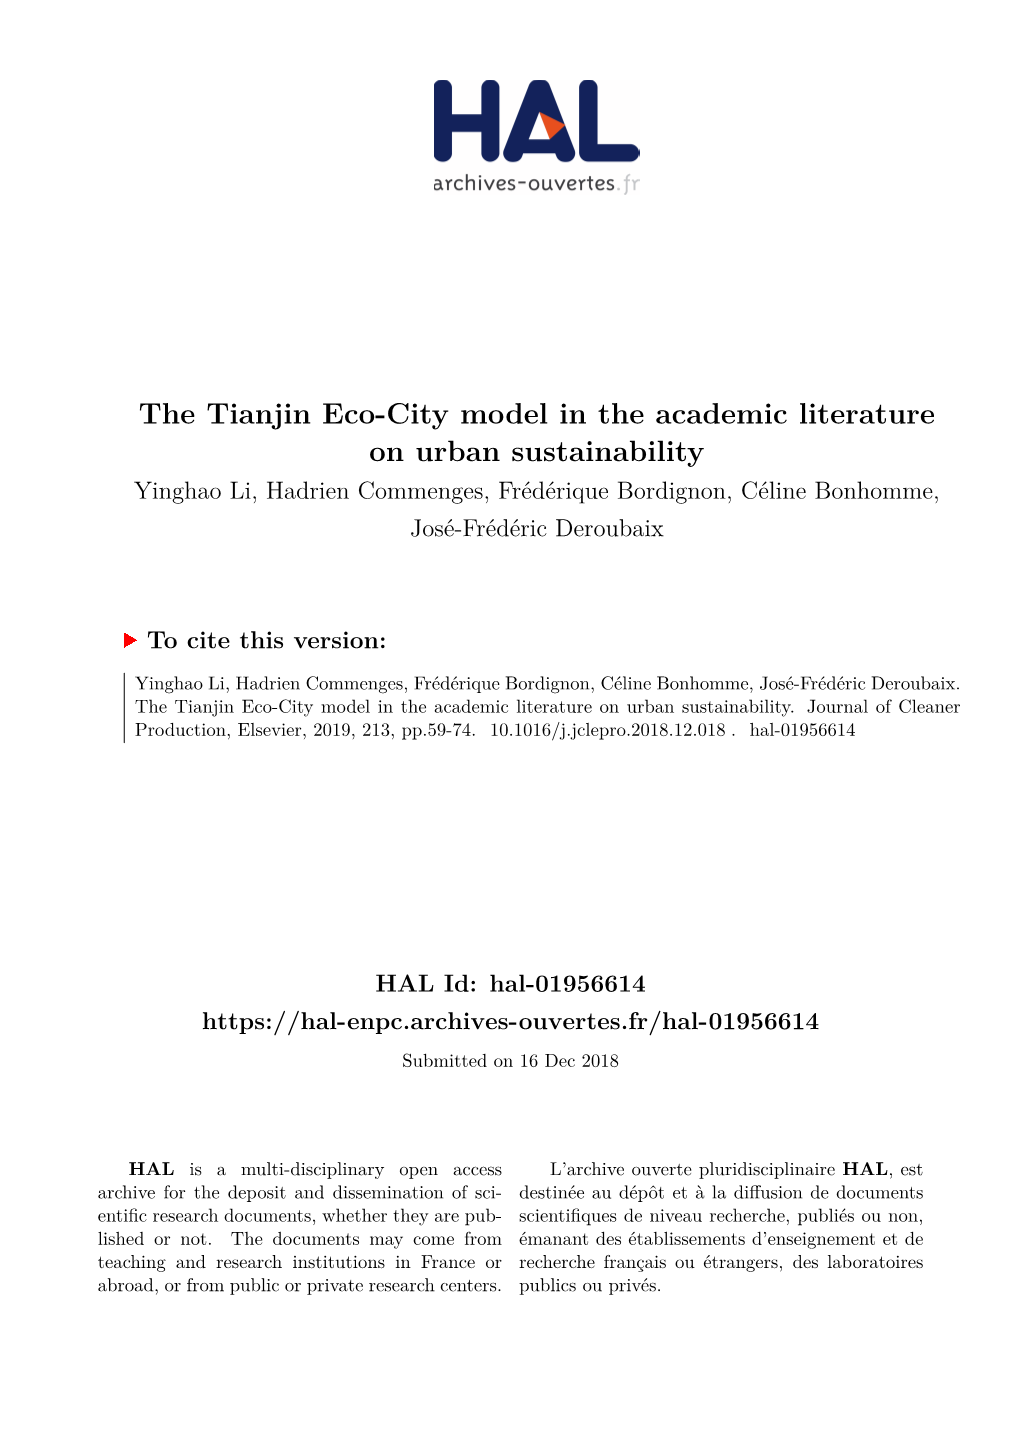 The Tianjin Eco-City Model in the Academic Literature on Urban